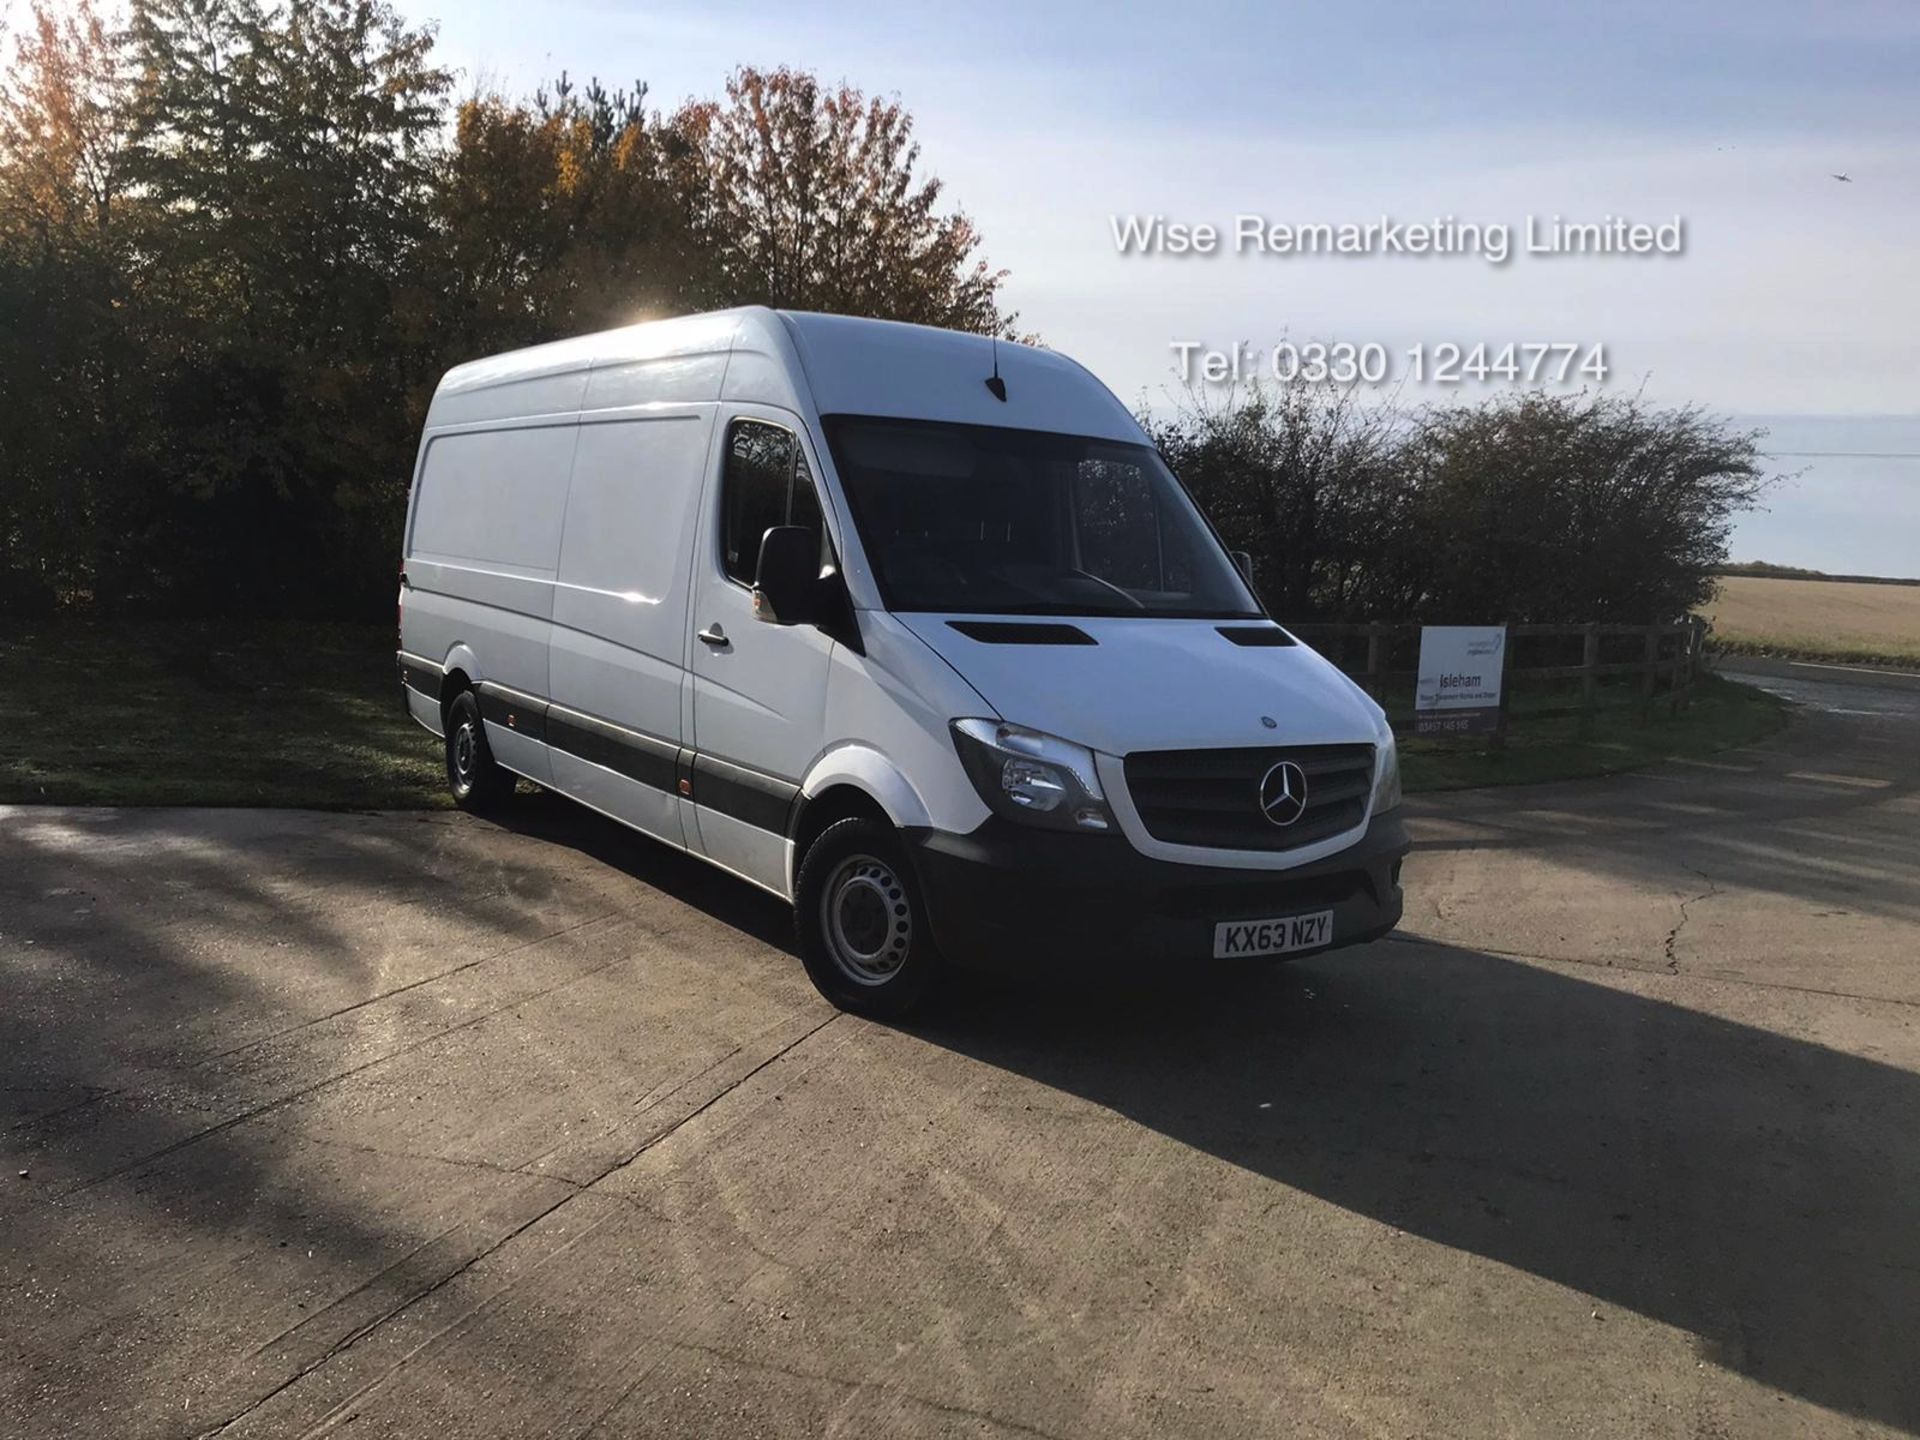 Mercedes Sprinter 313cdi 2.1l - LWB - 2014 Model - 1 Keeper From New - SAVE 20% NO VAT - Image 4 of 19